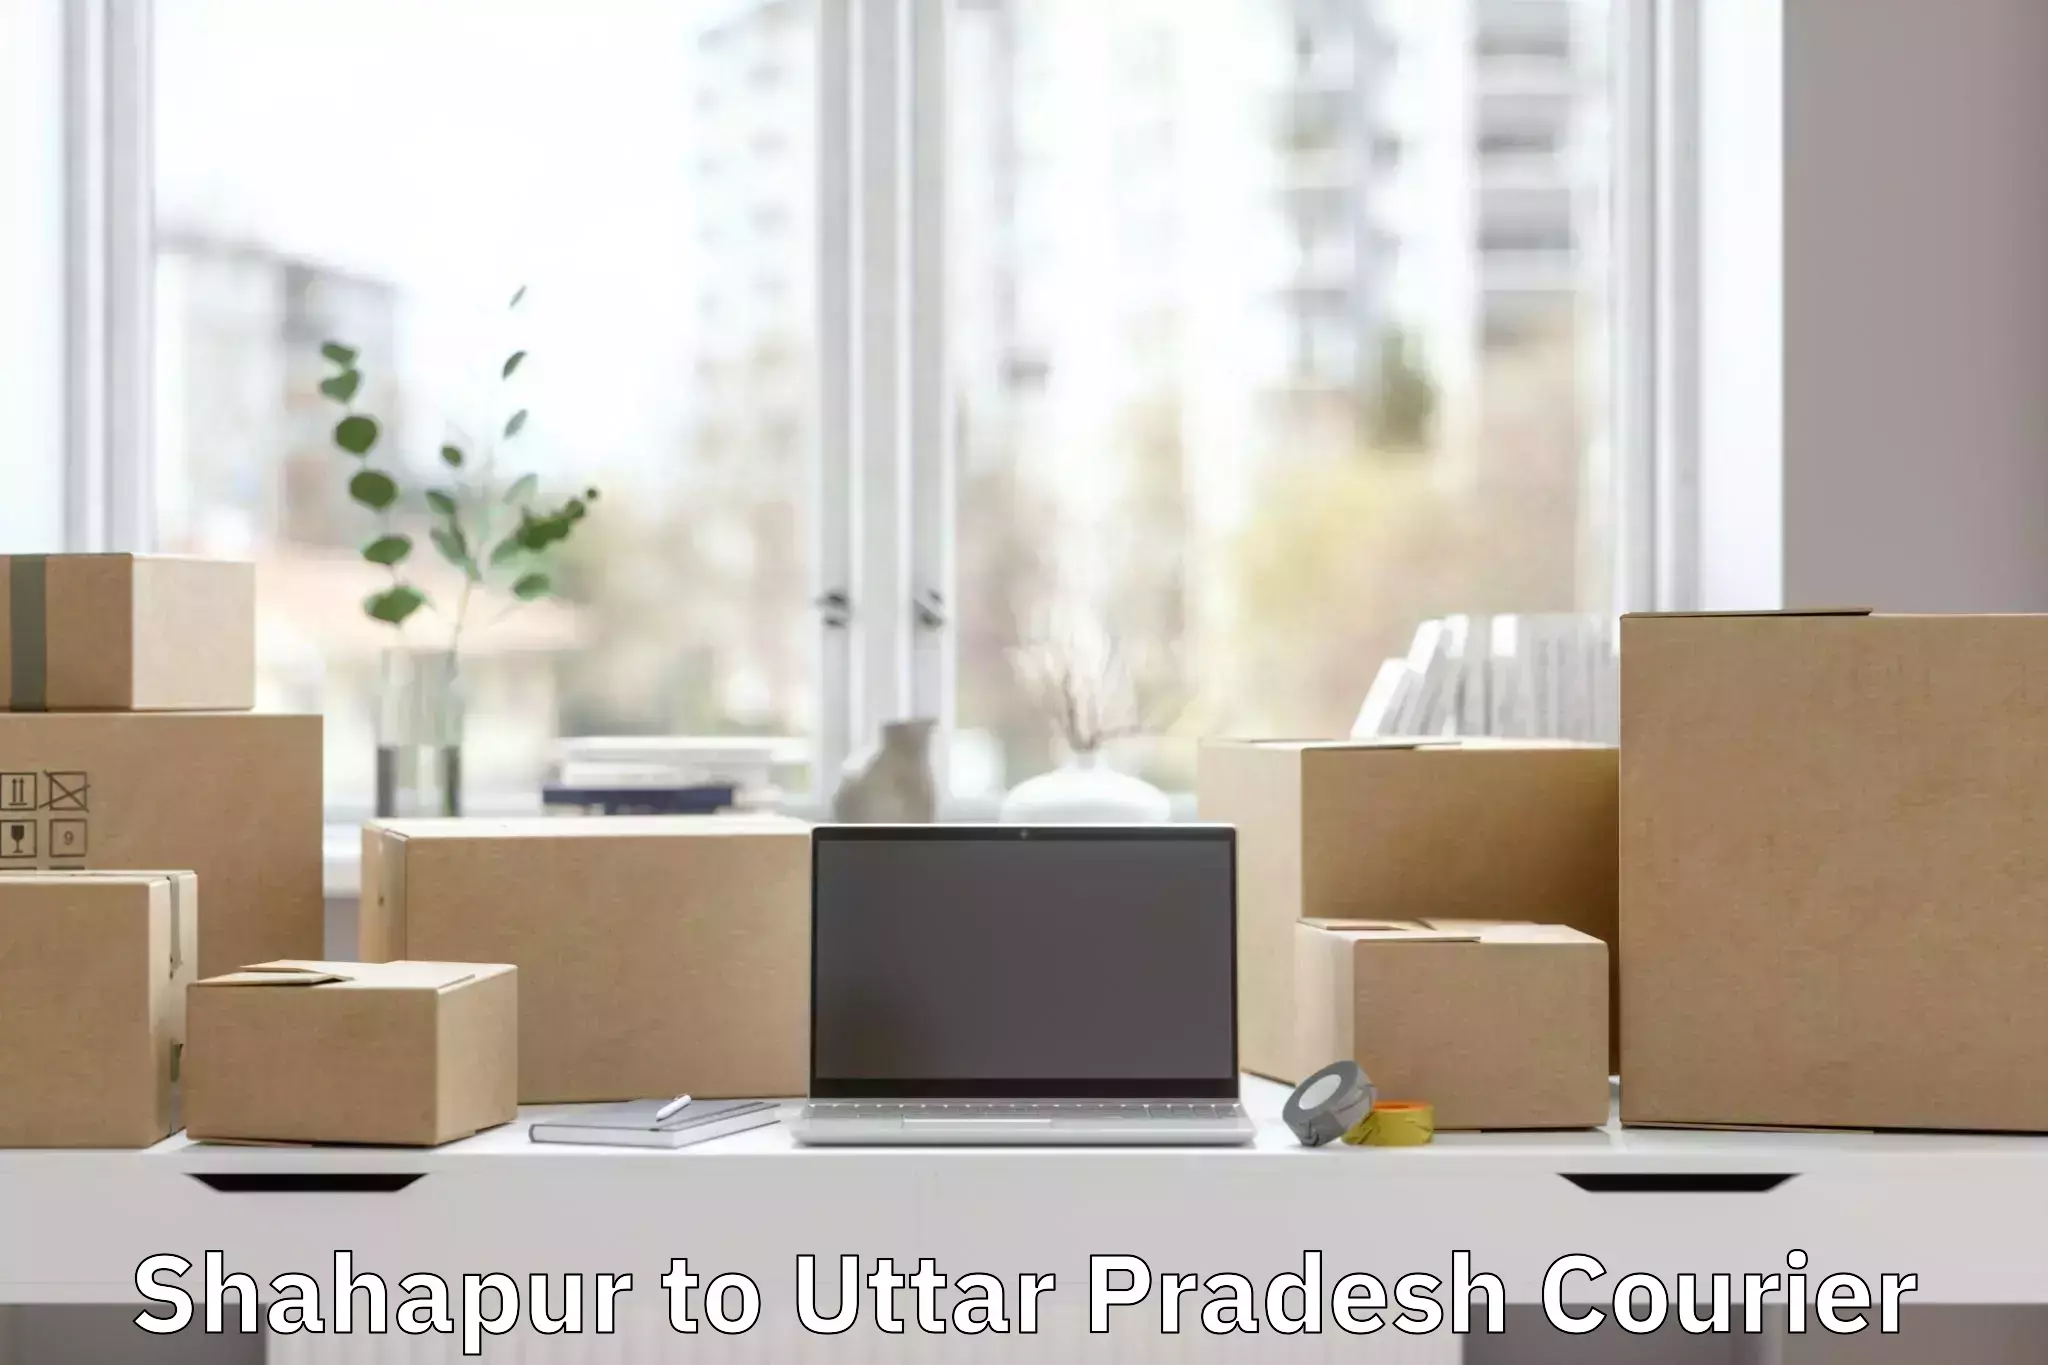 Instant baggage transport quote Shahapur to Kanpur